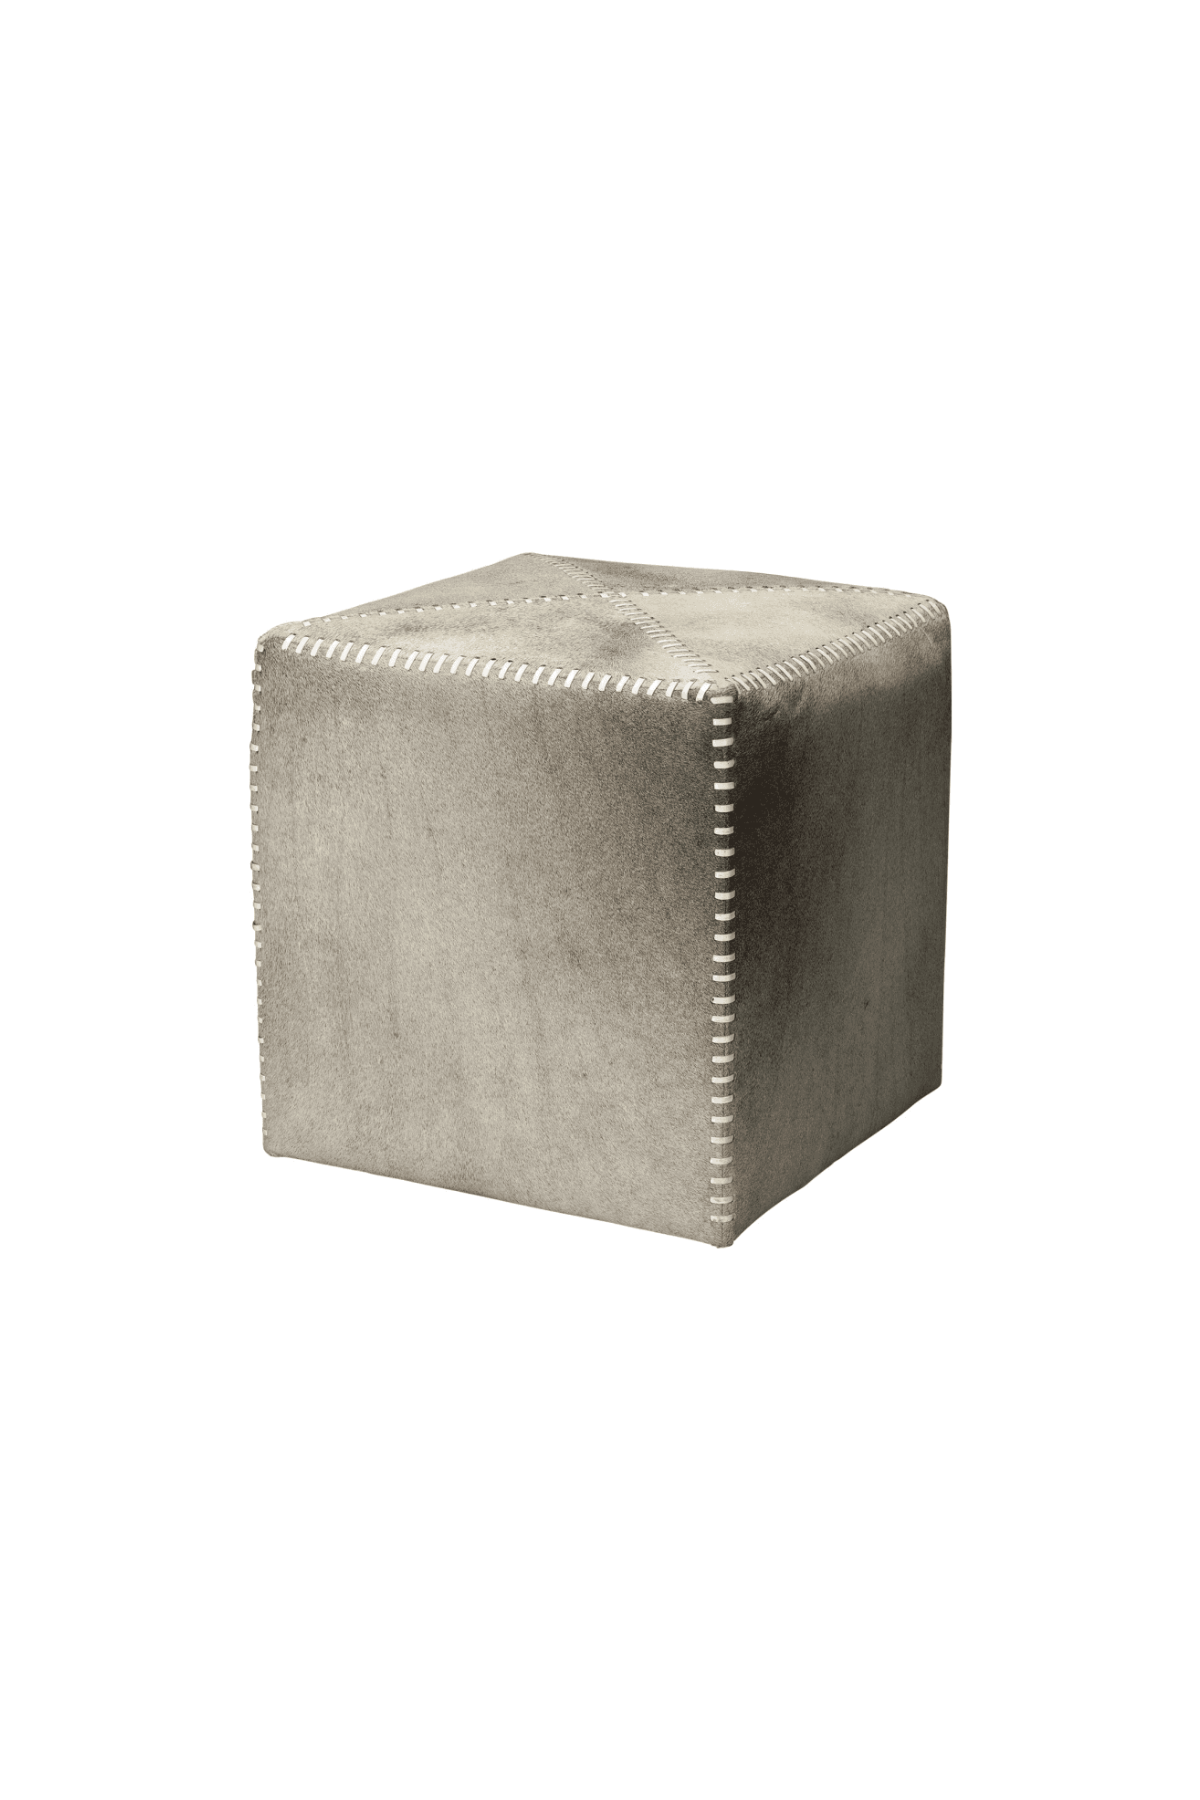 Miles Leather Ottoman - Small